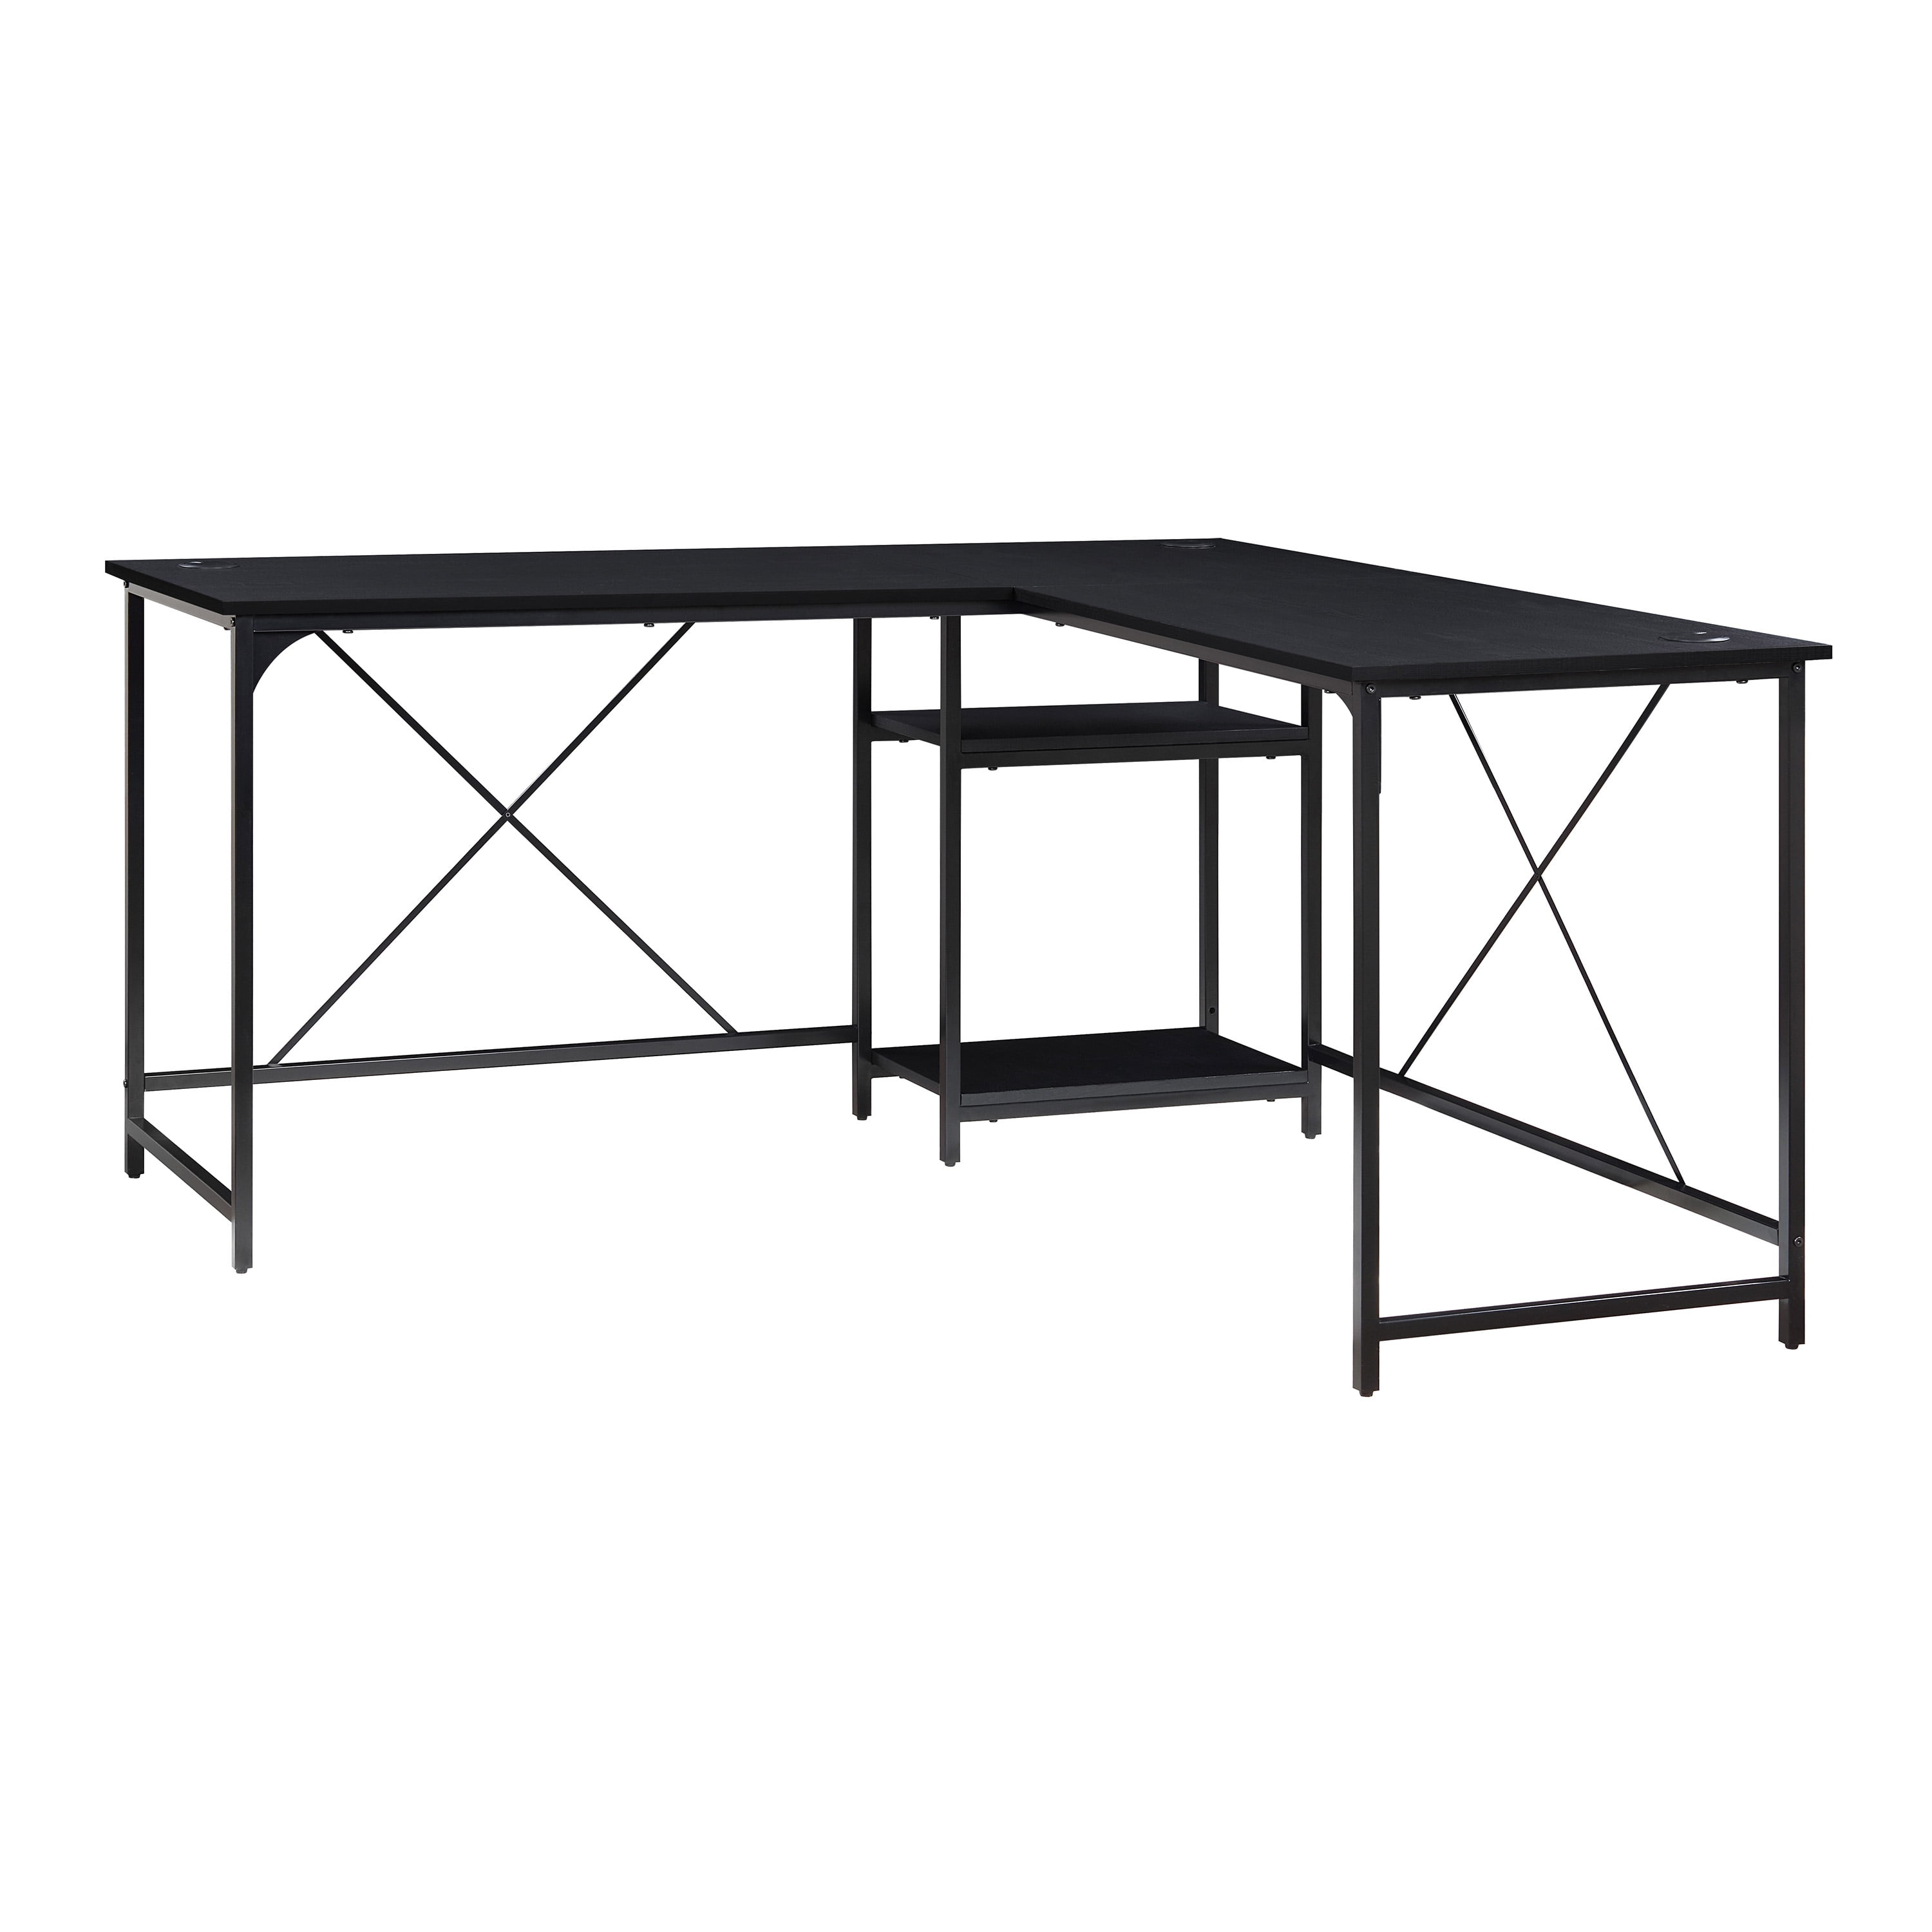 Mainstays Two-Way Convertible Desk with Lower Storage Shelf, Charcoal Finish and Black Metal Frame - 1